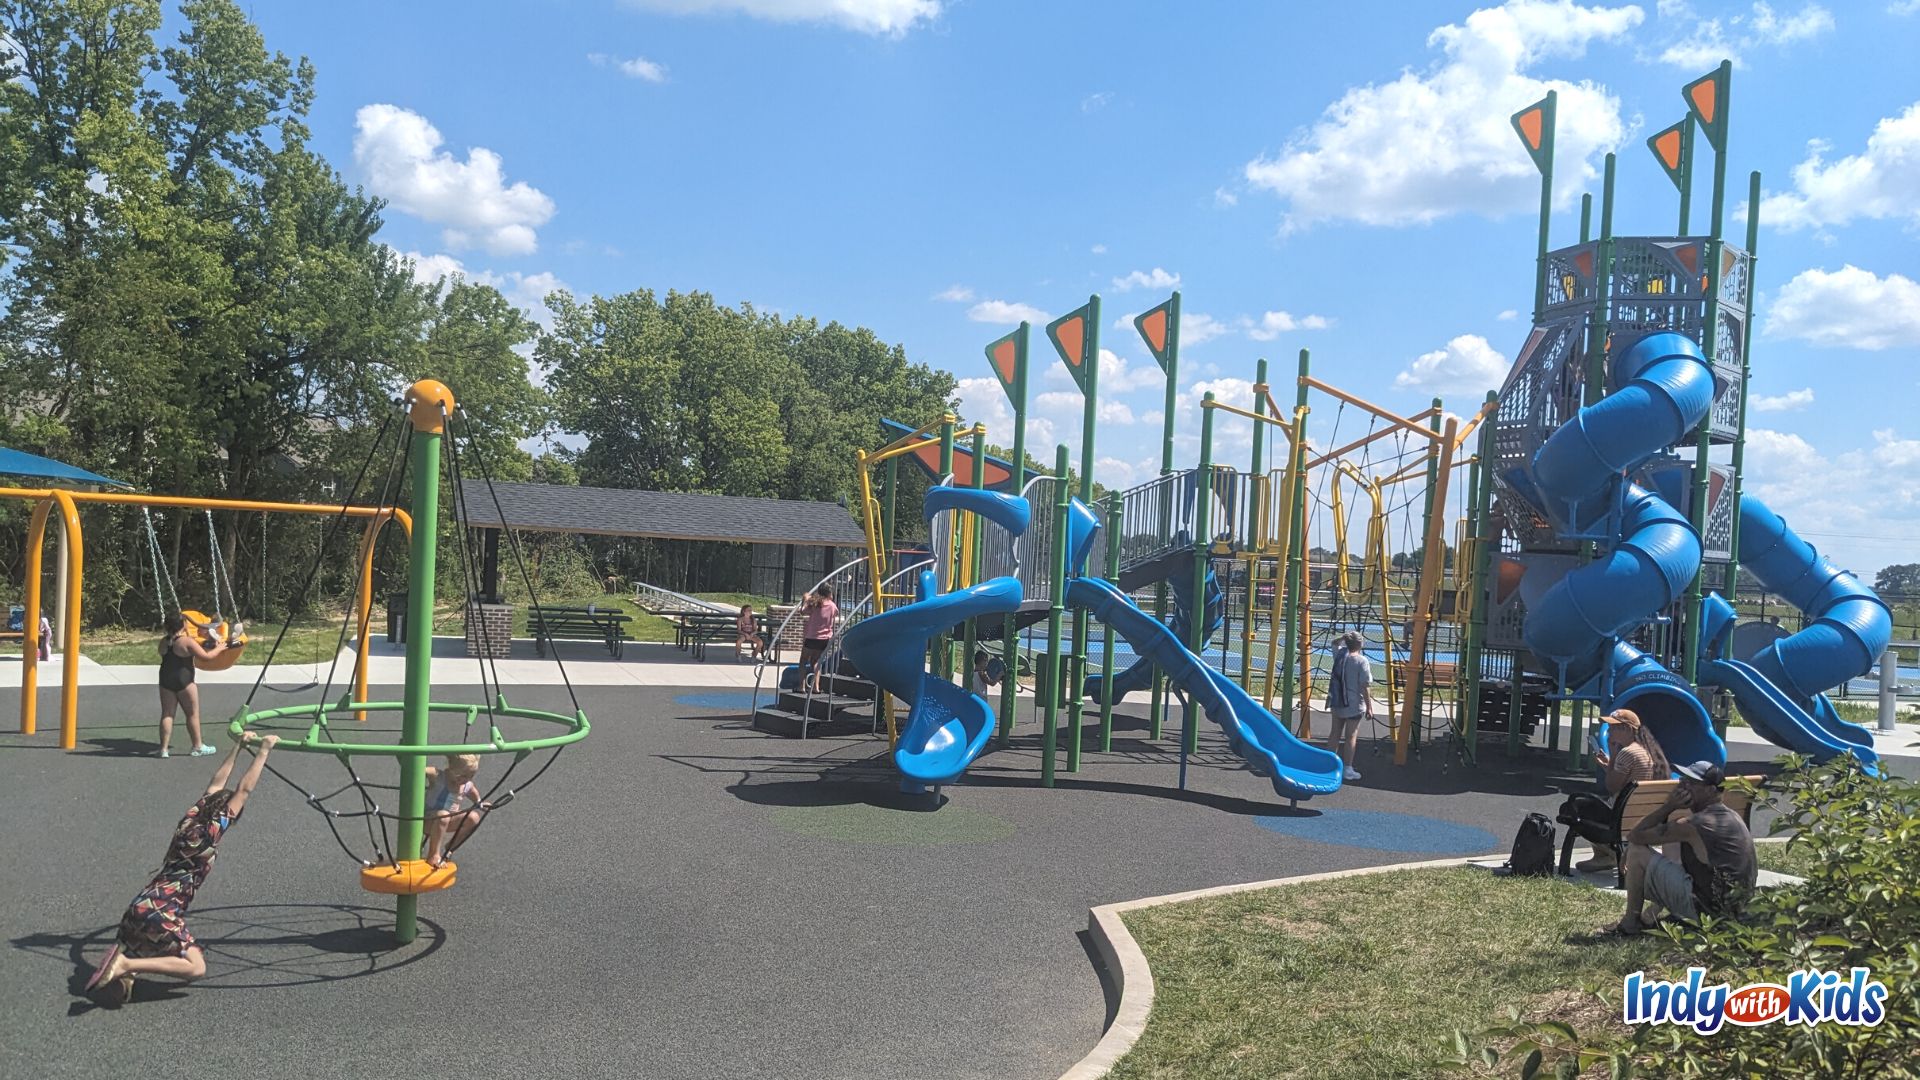 Kephart Park in Bargersville has a large playground and splash pad.